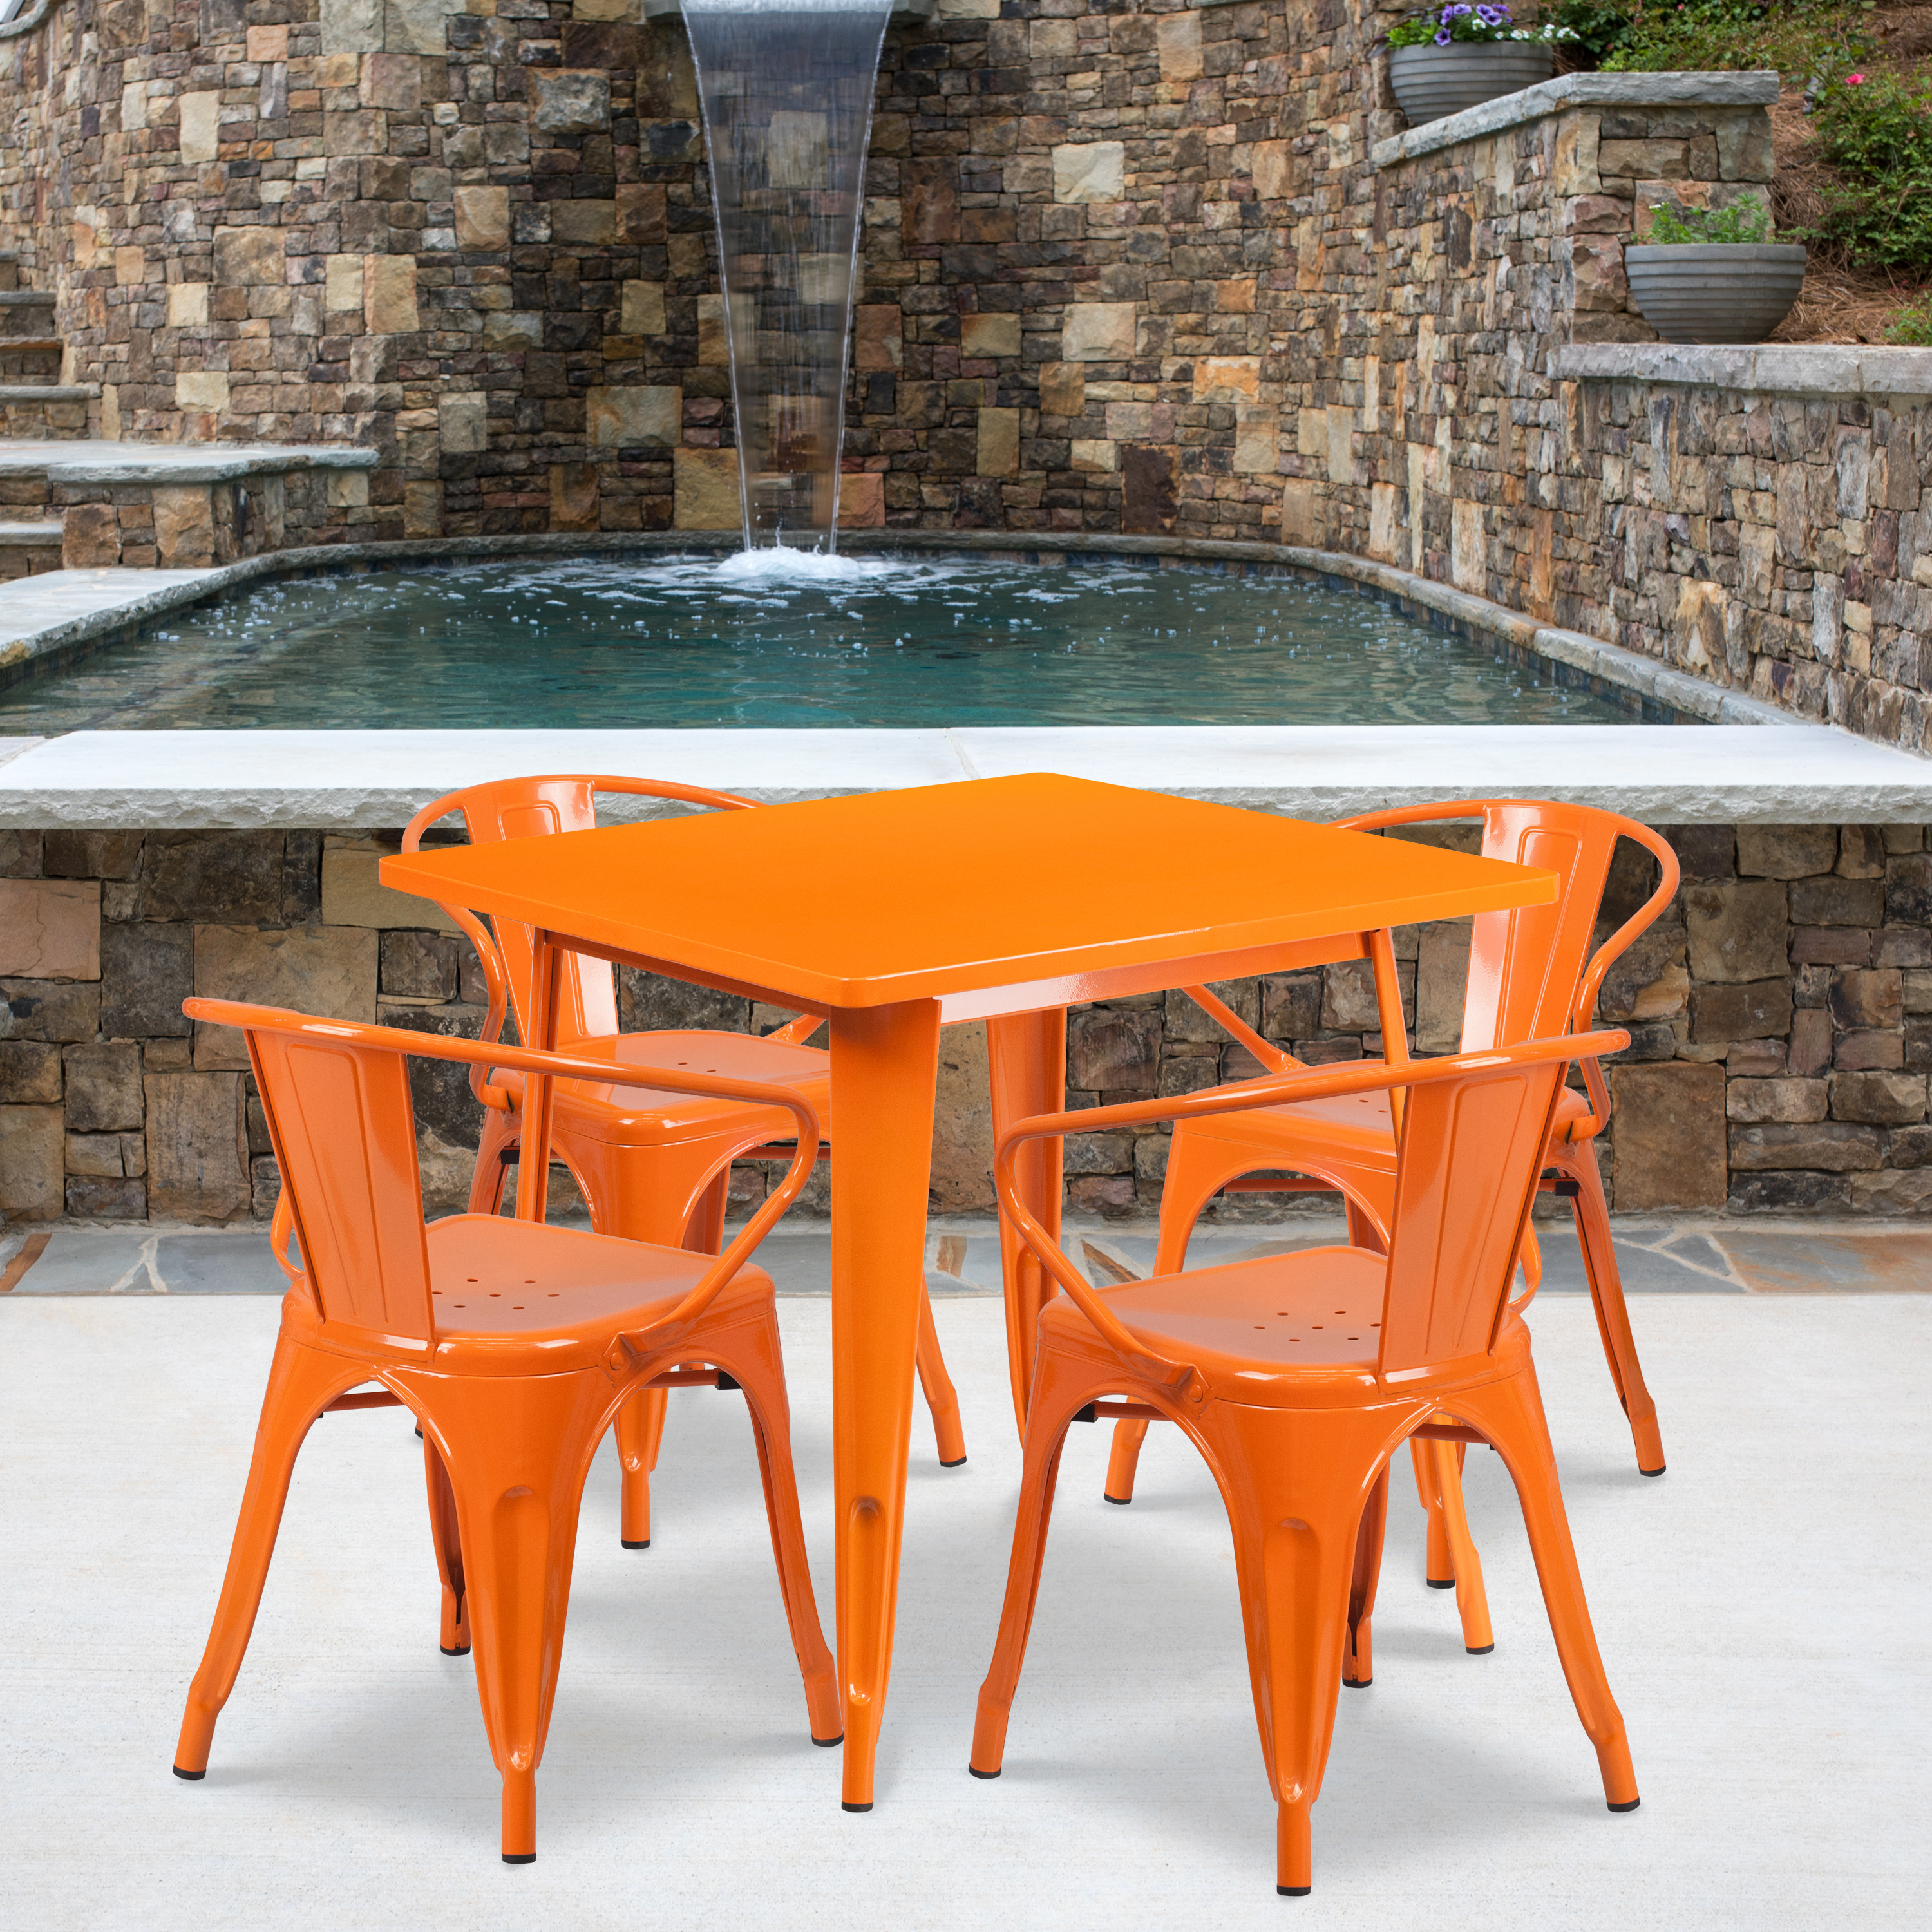 Flash Furniture Commercial Grade 31.5" Square Orange Metal Indoor-Outdoor Table Set with 4 Arm Chairs - image 1 of 5